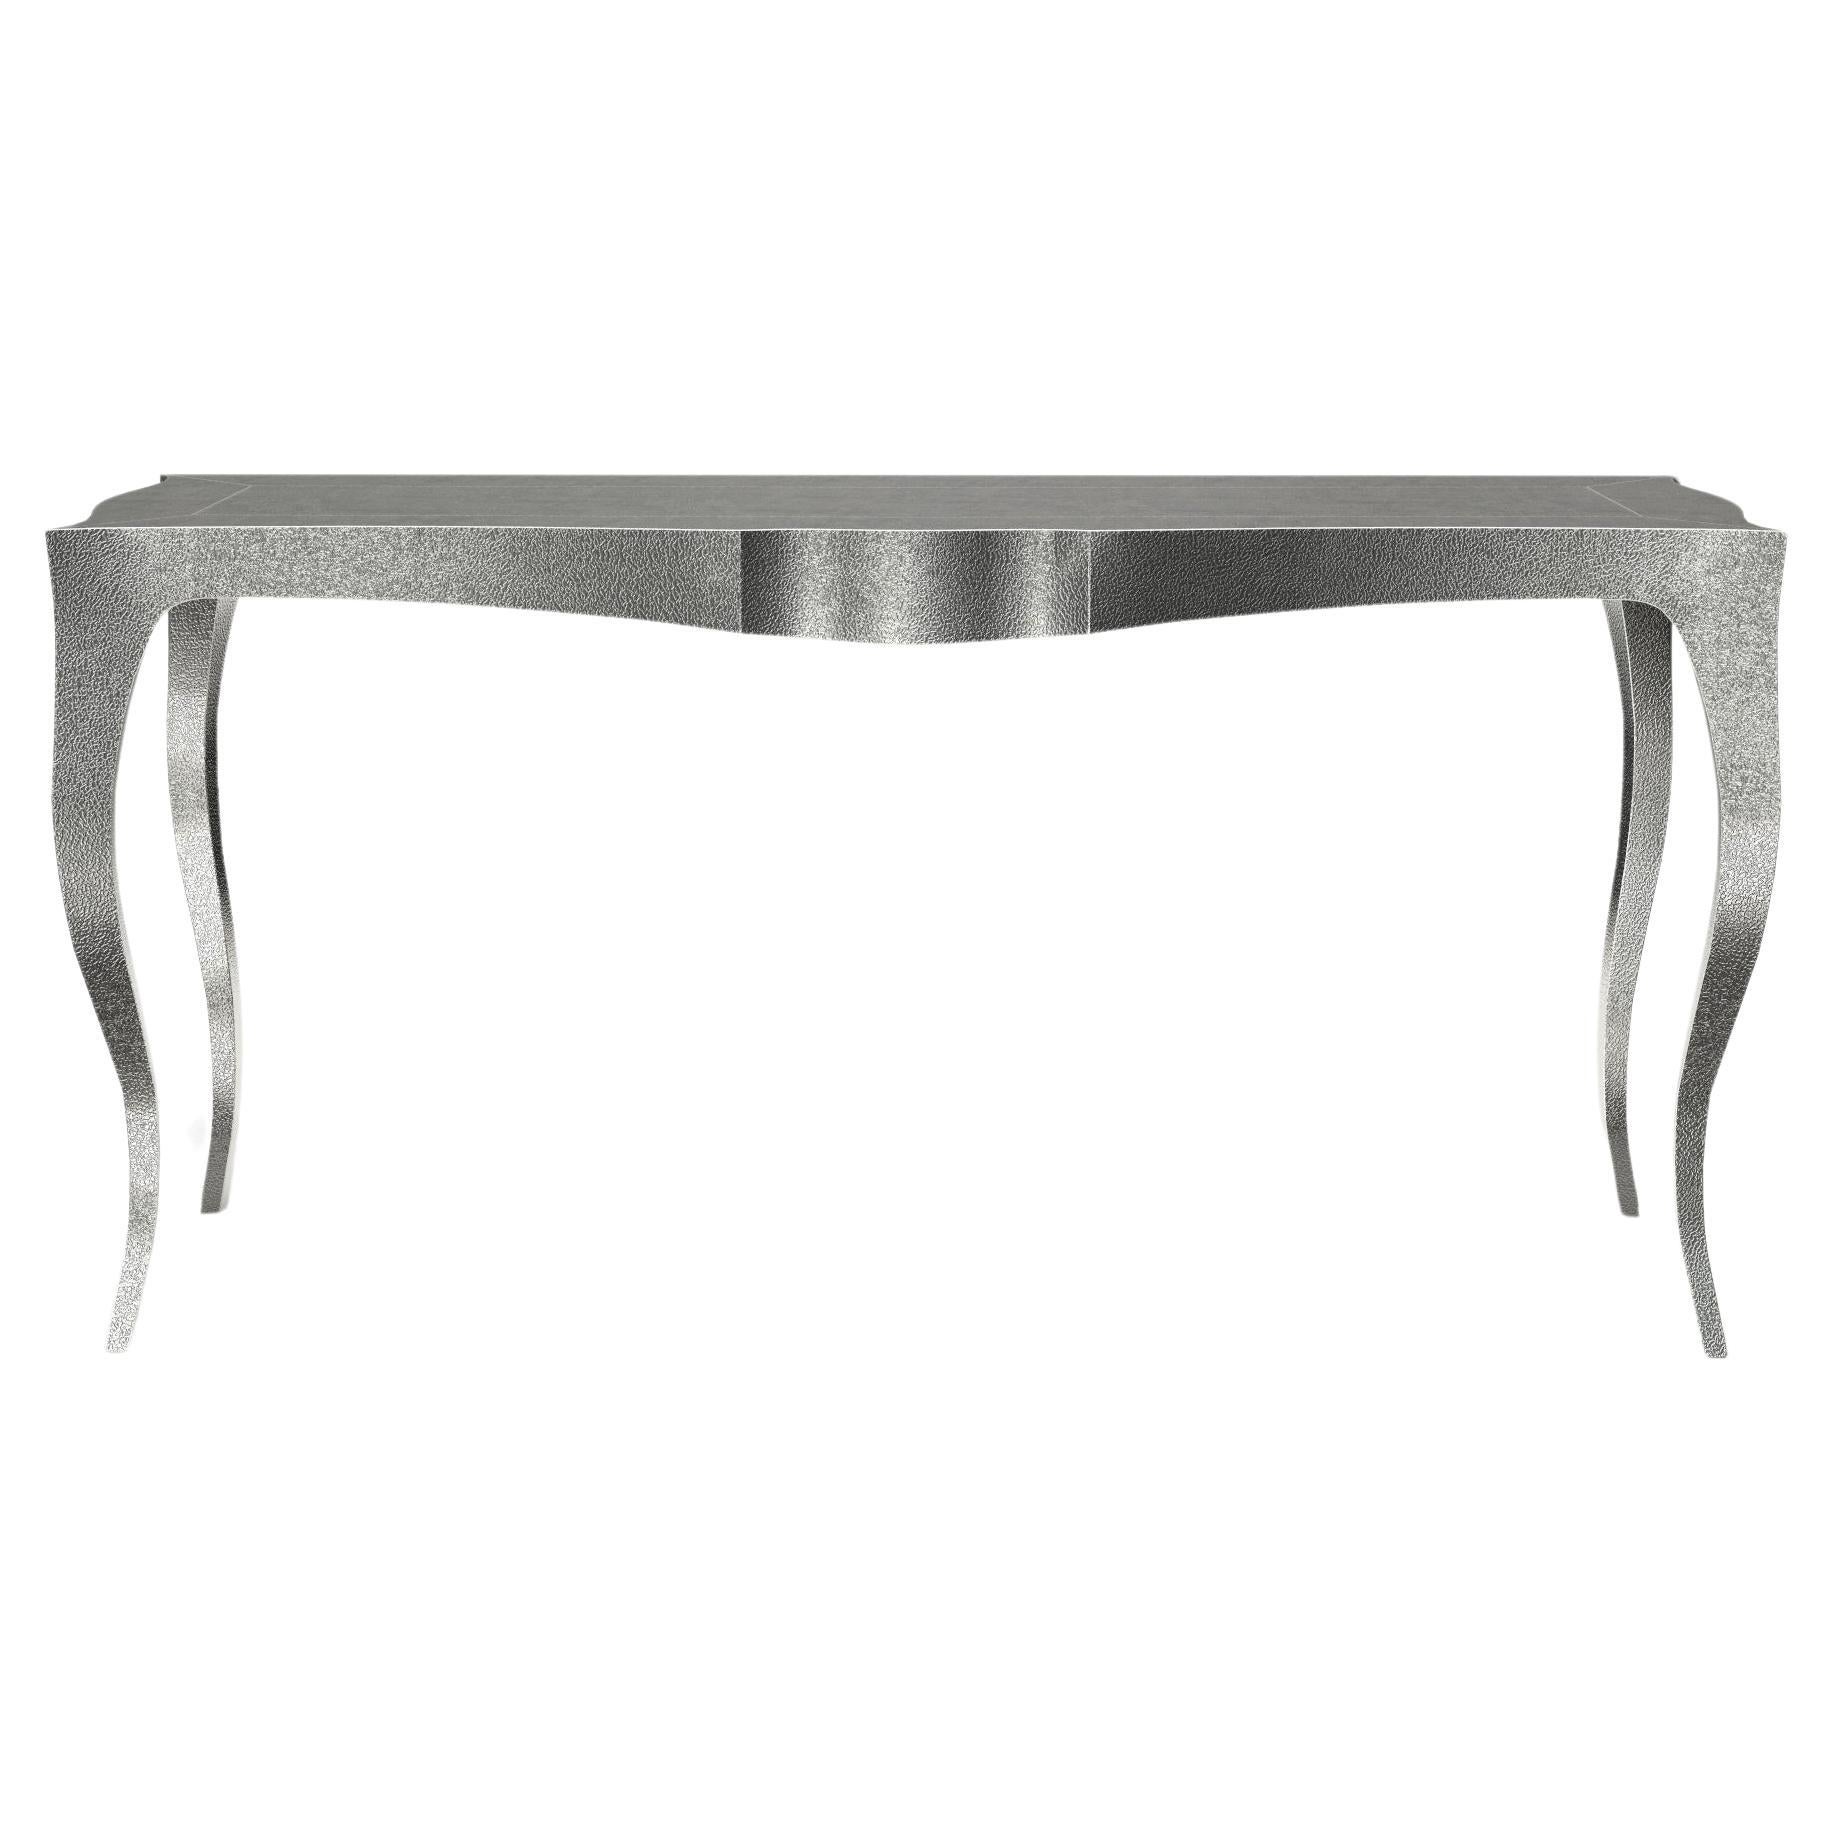 Louise Console Table from our Louise Collection. The renowned designer Paul Mathieu chose the name “Louise” when he created his more feminine version of Louis XV (1730-1760) furniture. The characteristic cabriole leg, curving outward at the knee and